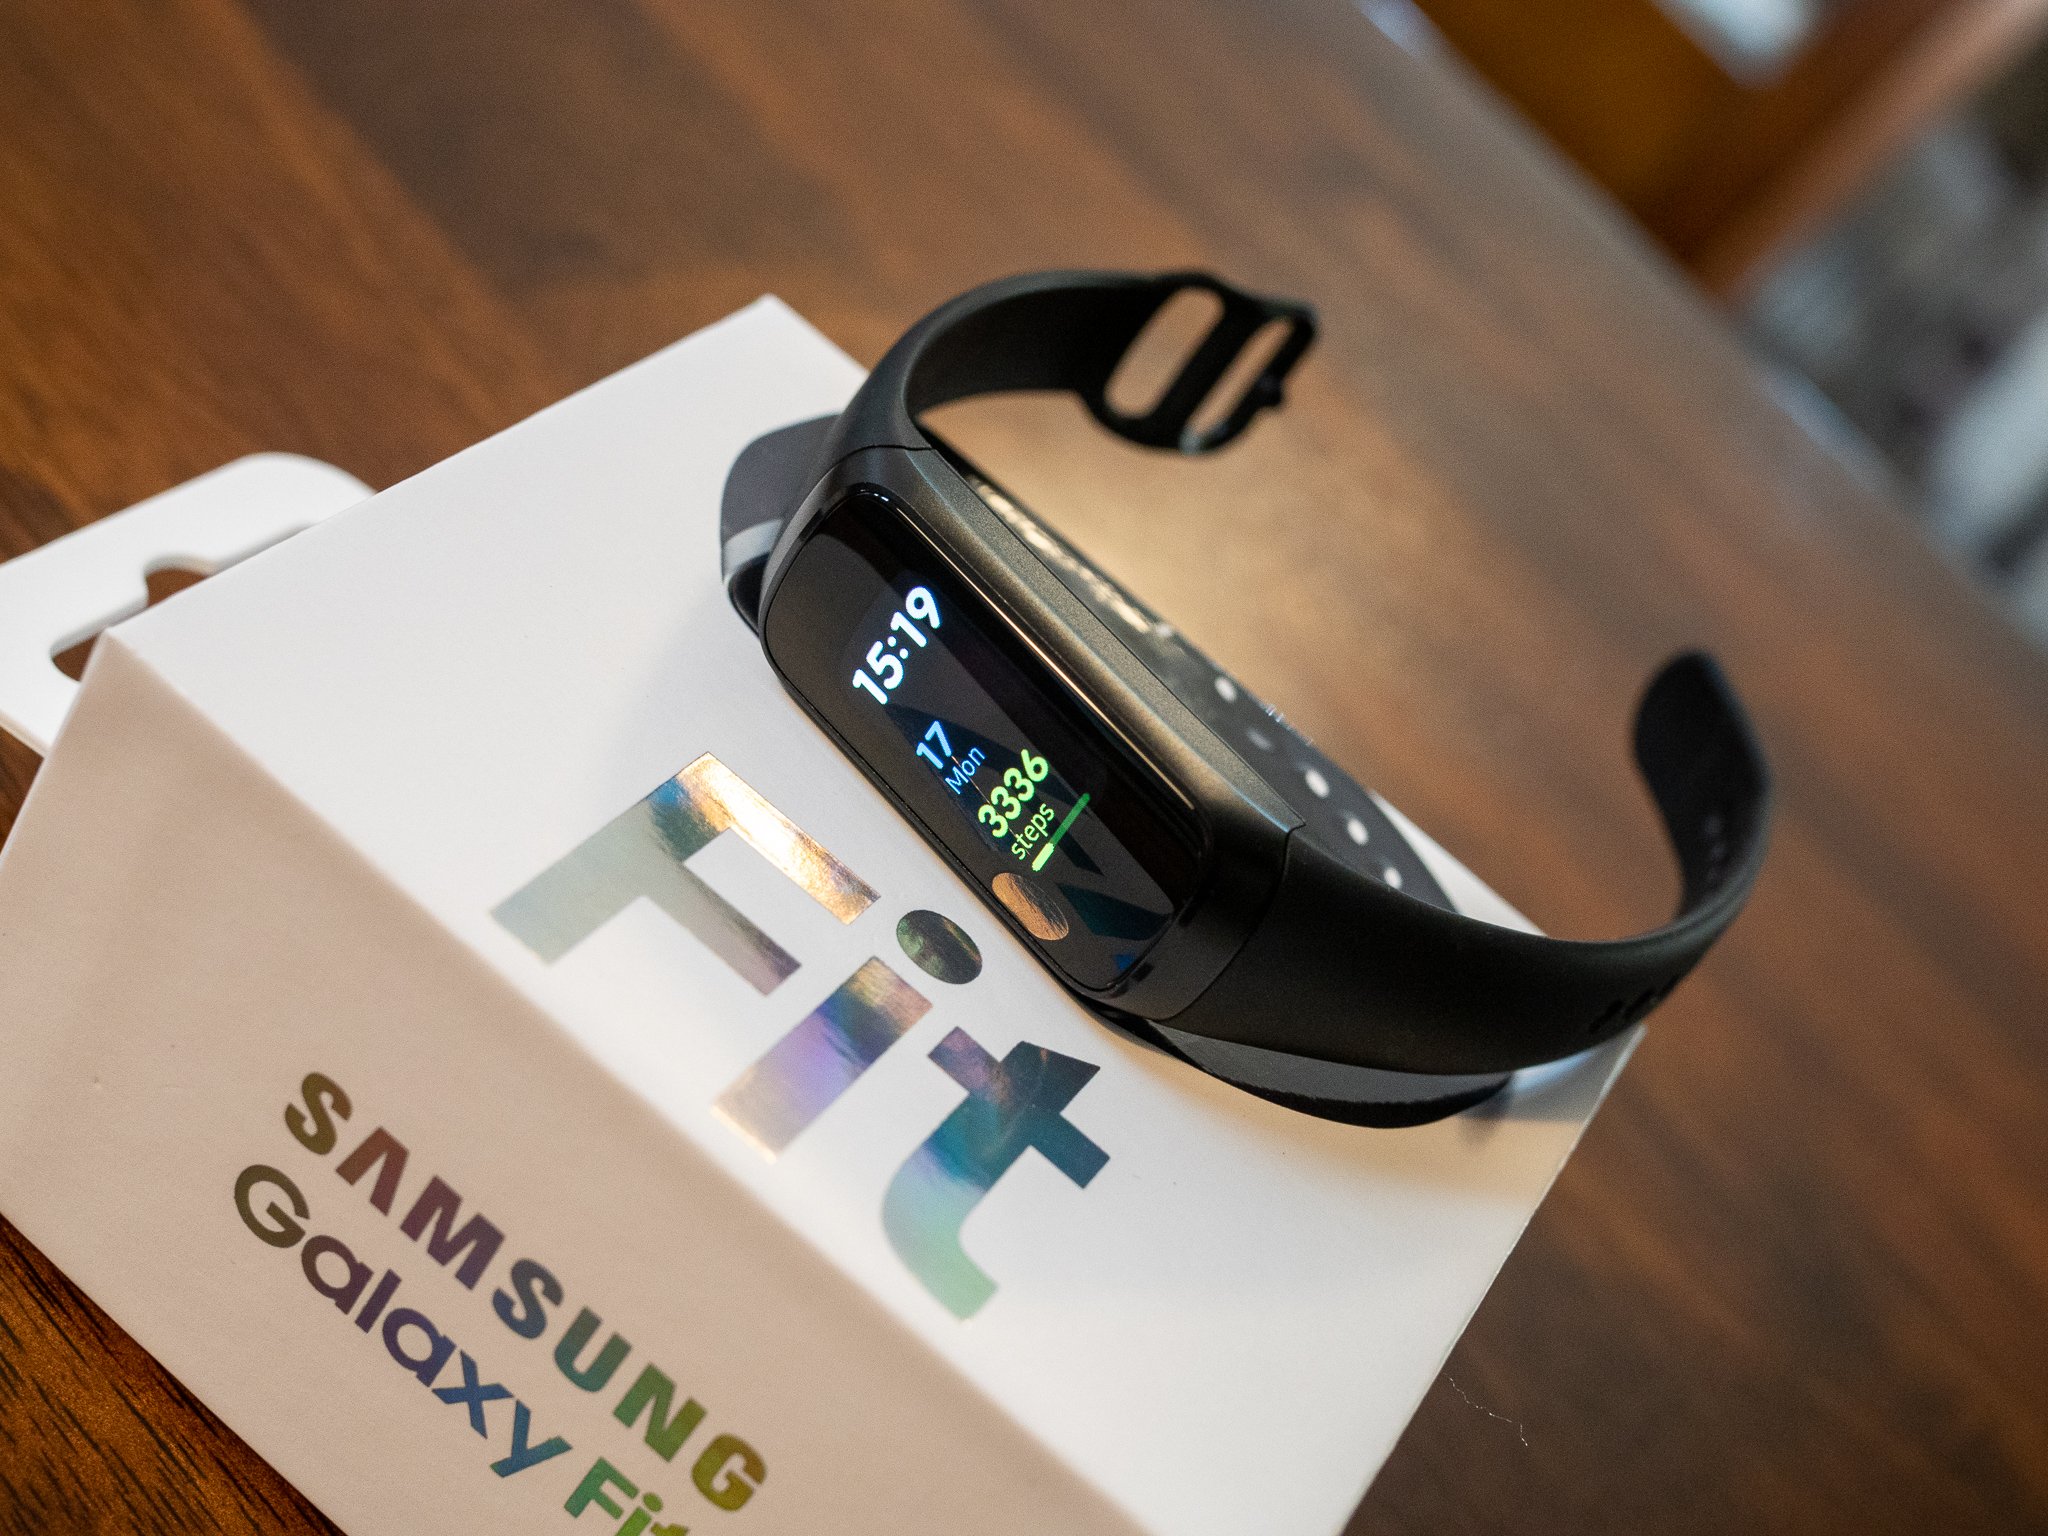 Samsung Galaxy Band Fit E on Sale, 53% OFF | www.groupgolden.com